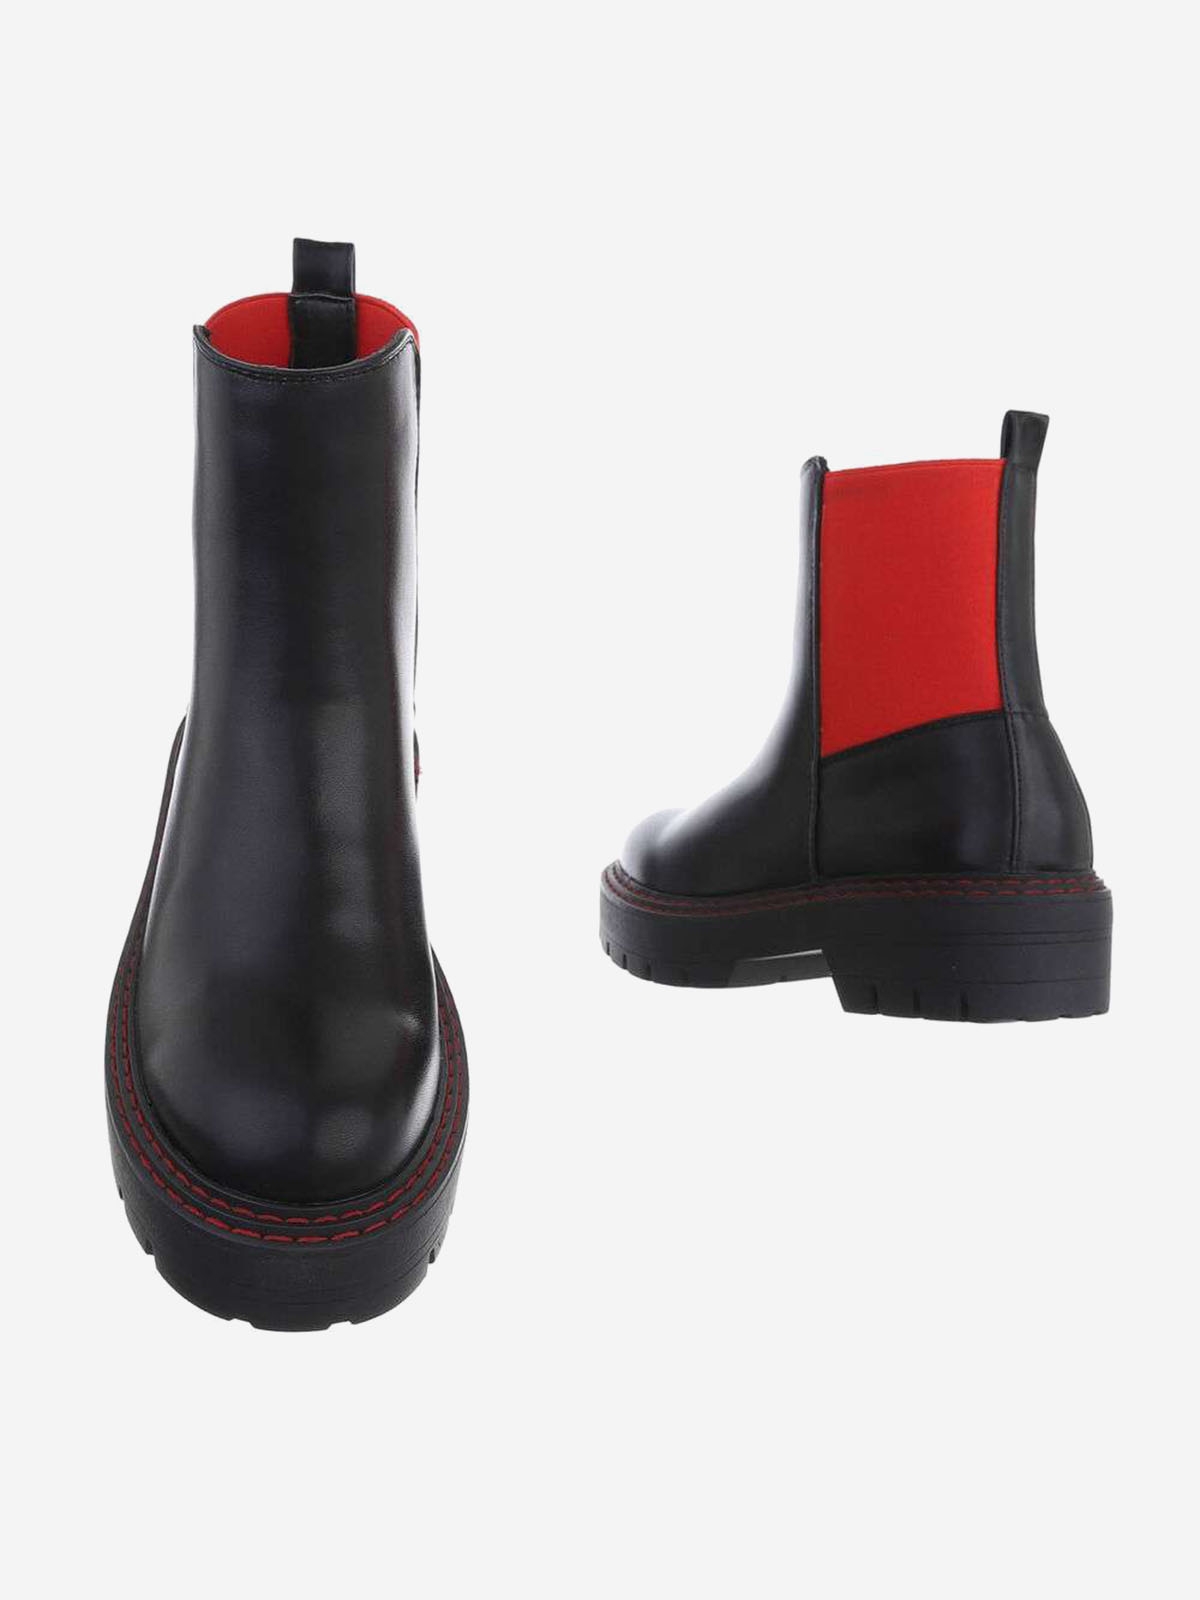 Chelsea style elastic women's ankle boots with red accent in black